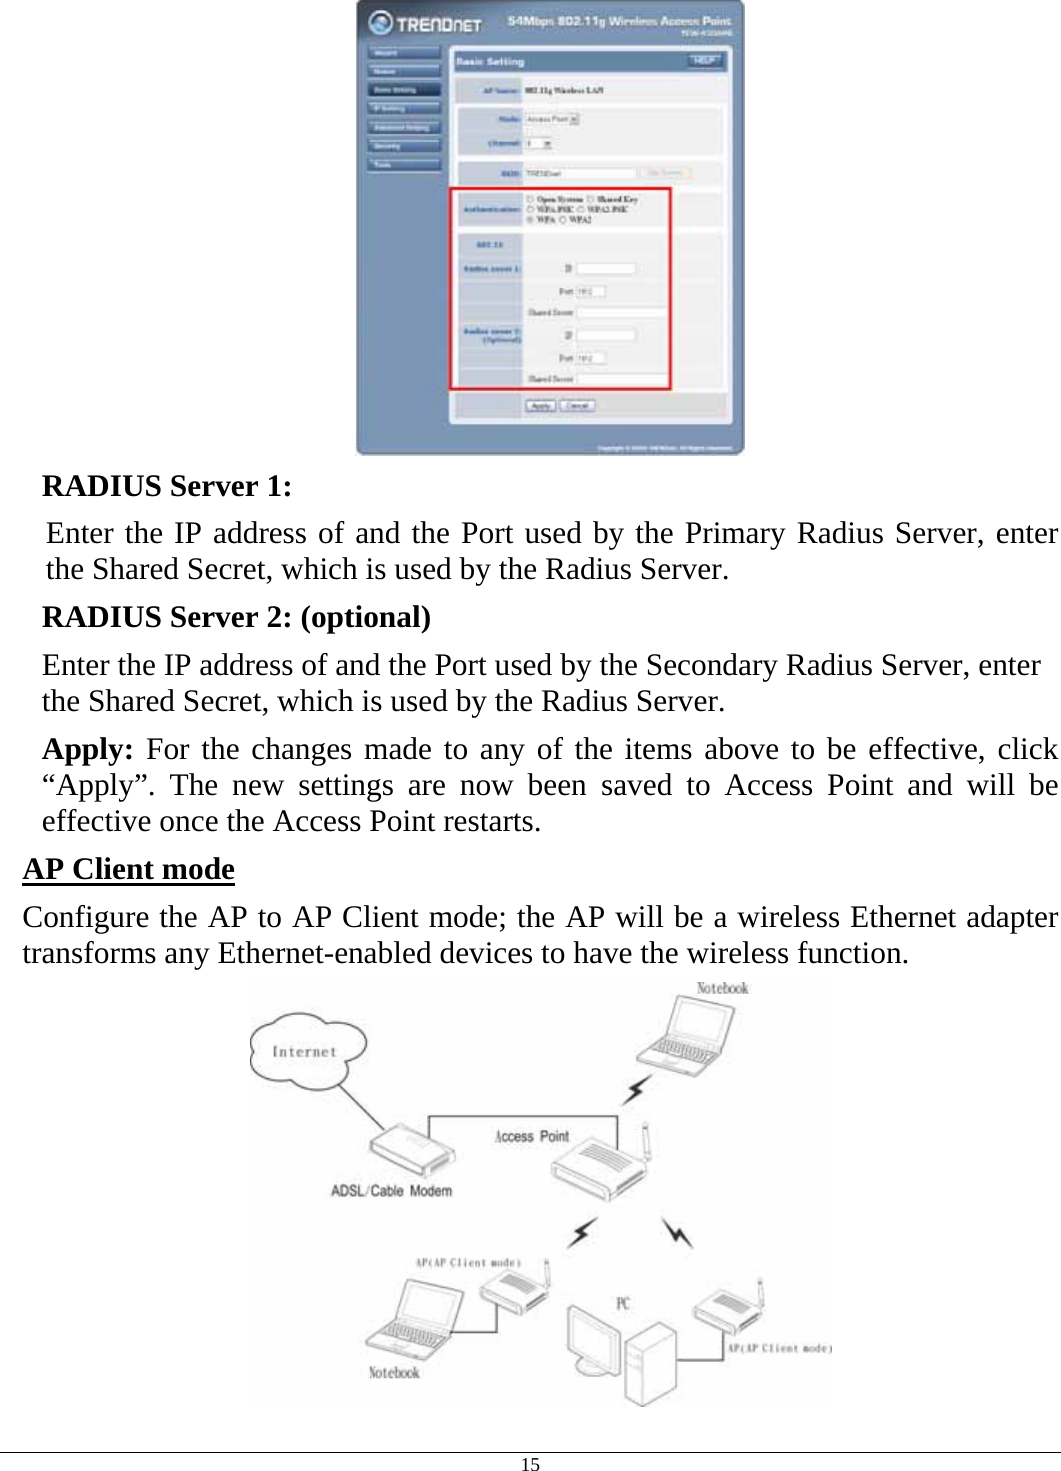  15  RADIUS Server 1:  Enter the IP address of and the Port used by the Primary Radius Server, enter the Shared Secret, which is used by the Radius Server. RADIUS Server 2: (optional) Enter the IP address of and the Port used by the Secondary Radius Server, enter the Shared Secret, which is used by the Radius Server.  Apply: For the changes made to any of the items above to be effective, click “Apply”. The new settings are now been saved to Access Point and will be effective once the Access Point restarts. AP Client mode  Configure the AP to AP Client mode; the AP will be a wireless Ethernet adapter transforms any Ethernet-enabled devices to have the wireless function.  